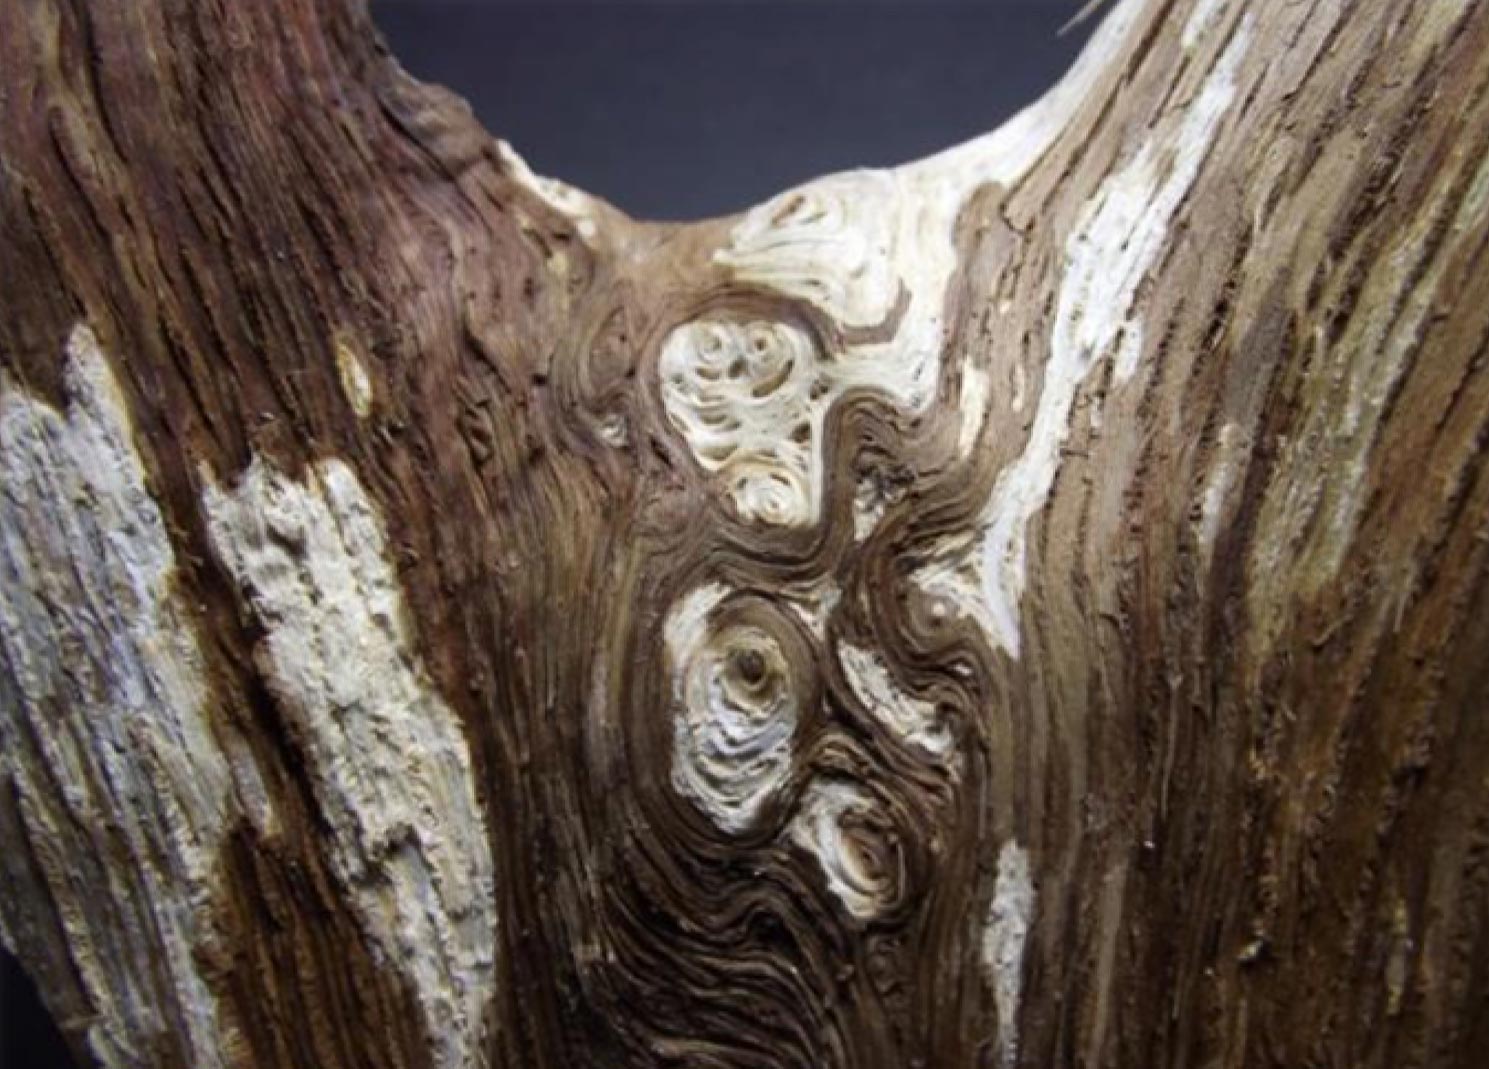 Whirled wood grain pattern forming an interlock between two limbs in a mature oak tree